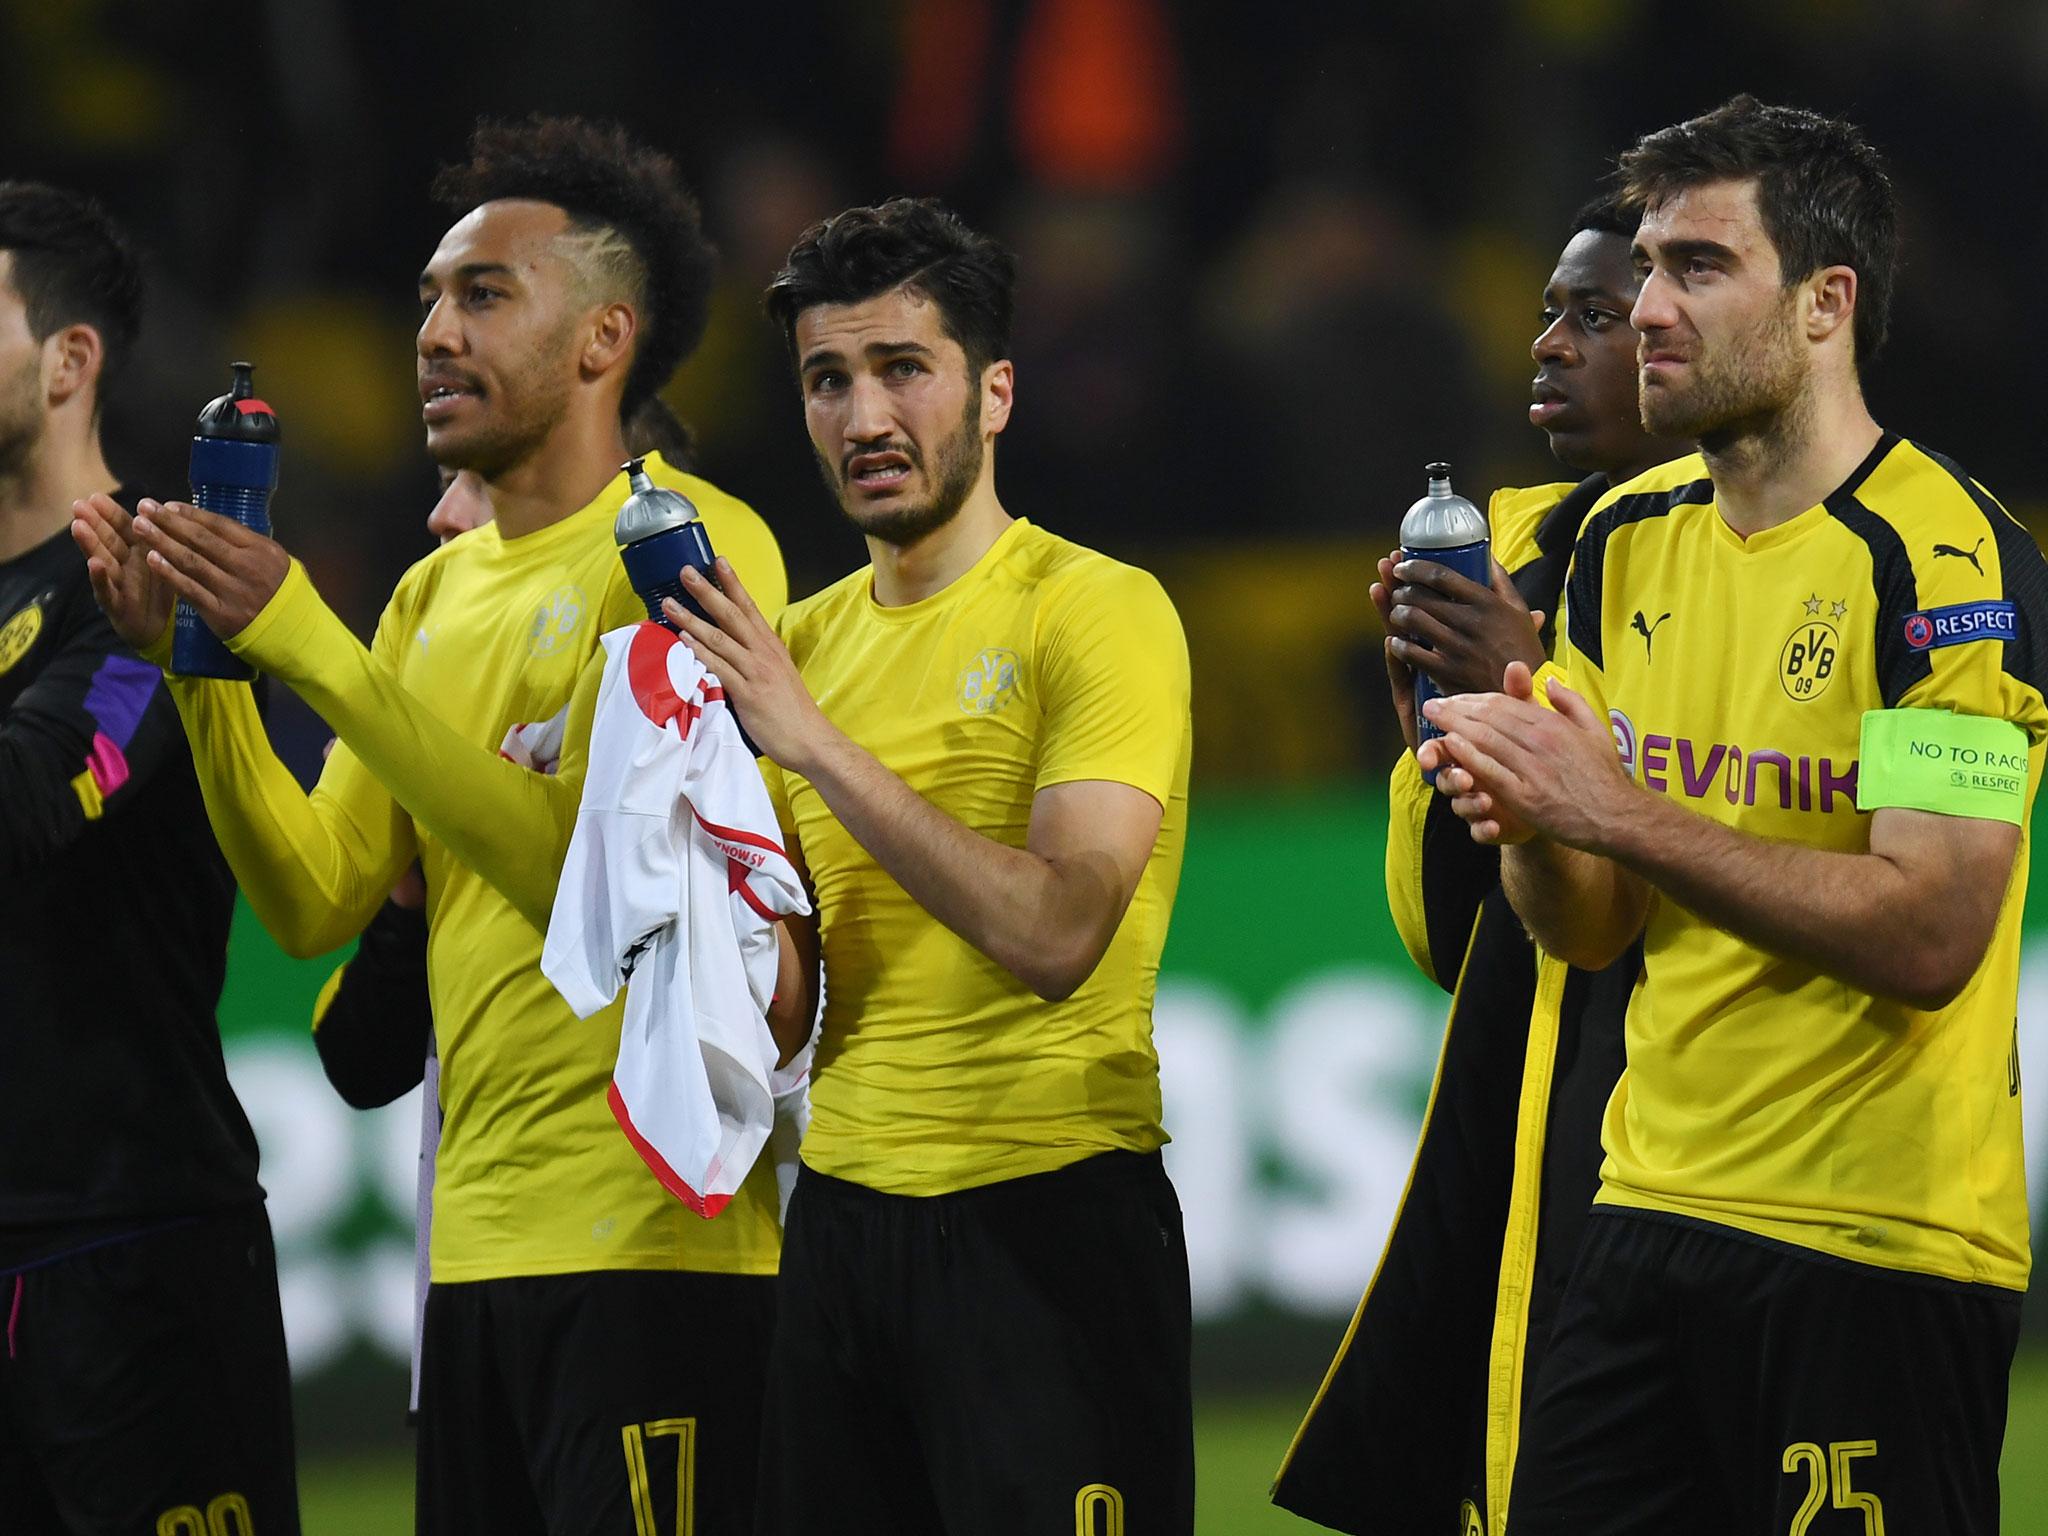 Borussia Dortmund played less than 24 hours after the terrifying attack on their team bus